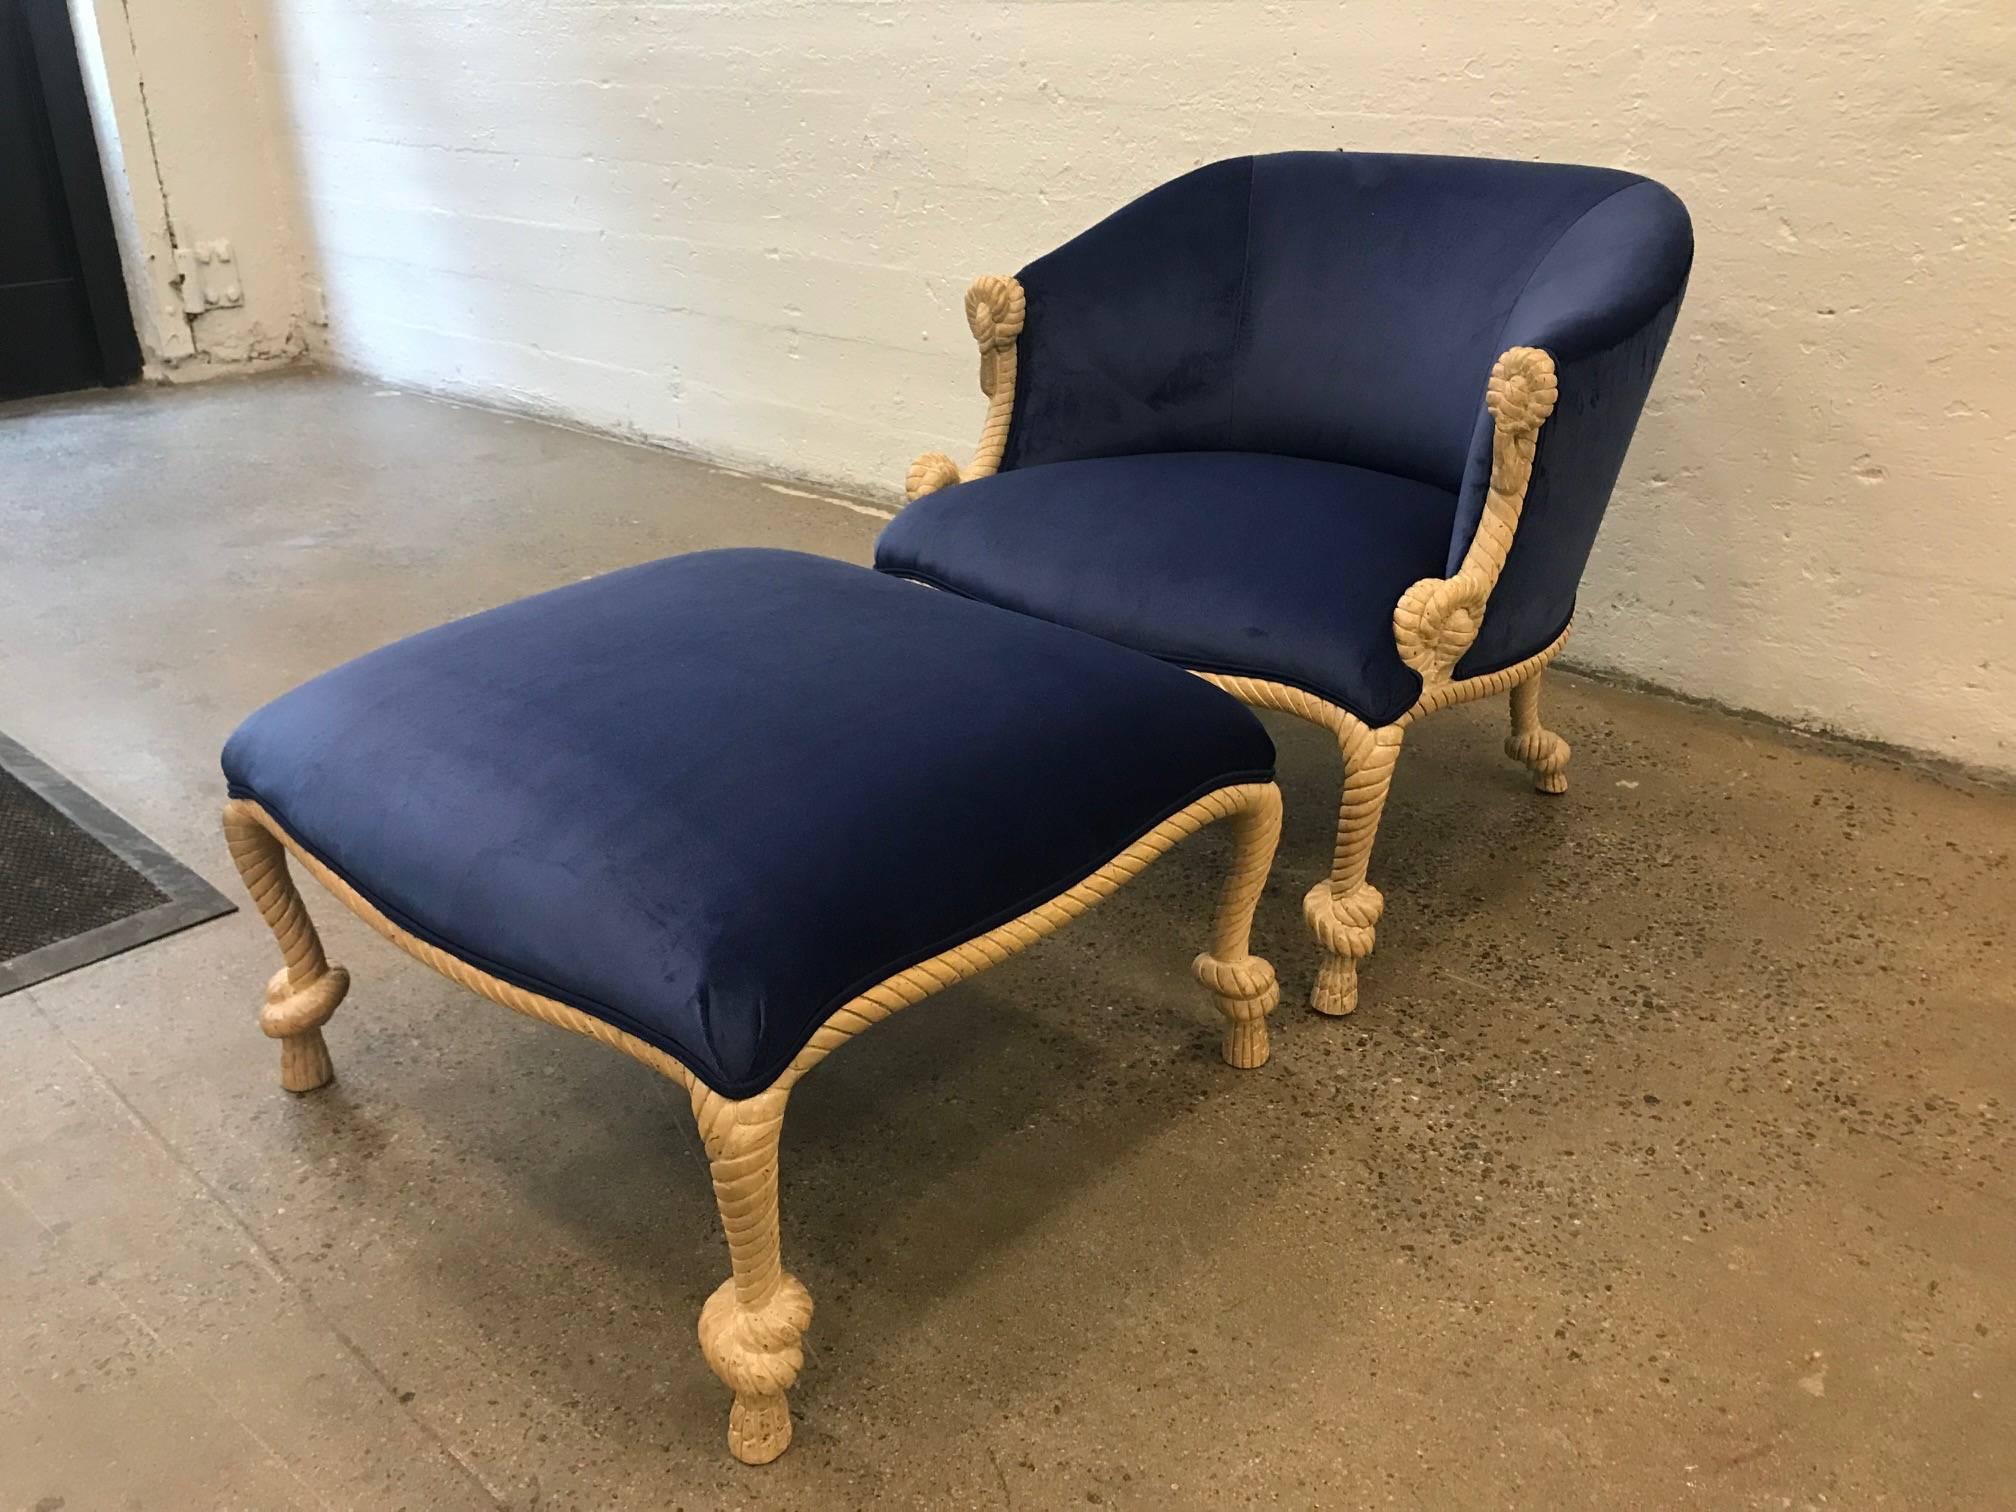 Rope and tassel chair with matching ottoman in blue velvet. The chair has a carved wood rope style frame with beautiful, newly upholstered, velvet upholstery.
Chair measures: 27.5 W x 28 D x 26.5 H
Ottoman measures: 25.5 W x 23.5 D x 15.5 H.